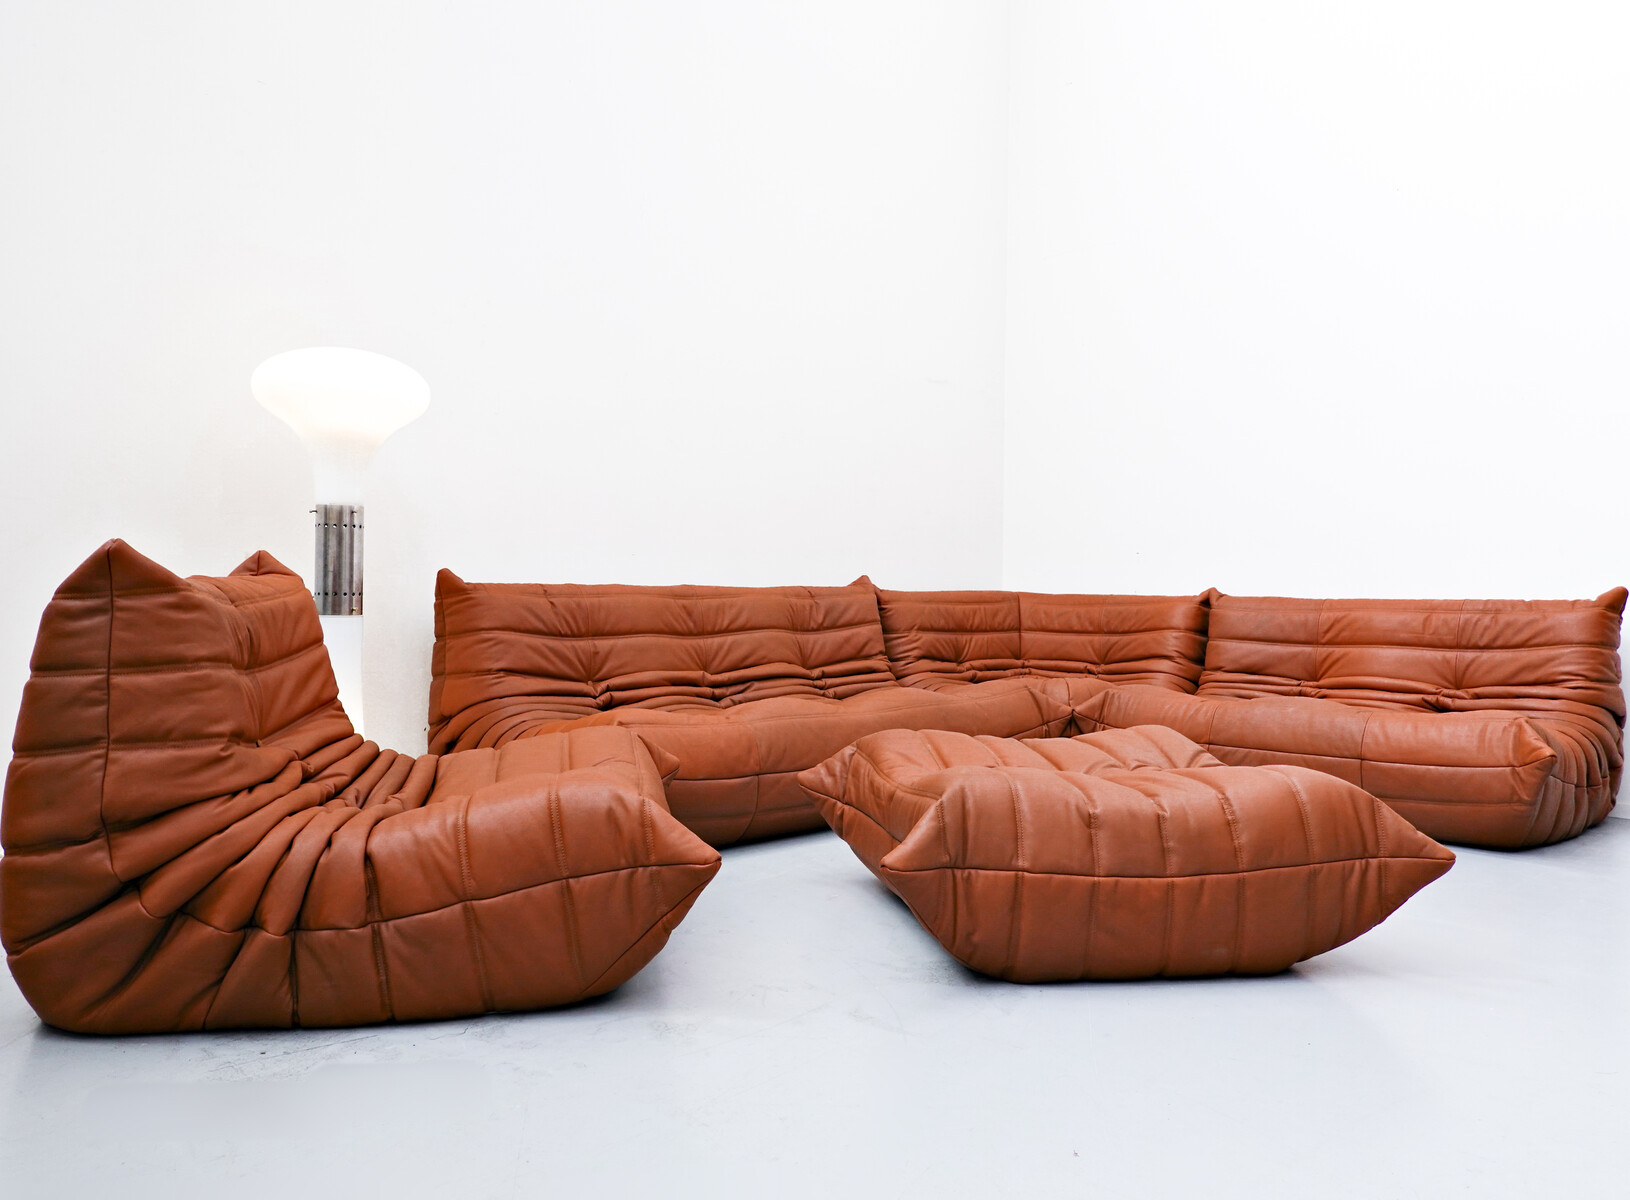 Sofas - Items by category - European ANTIQUES & DECORATIVE